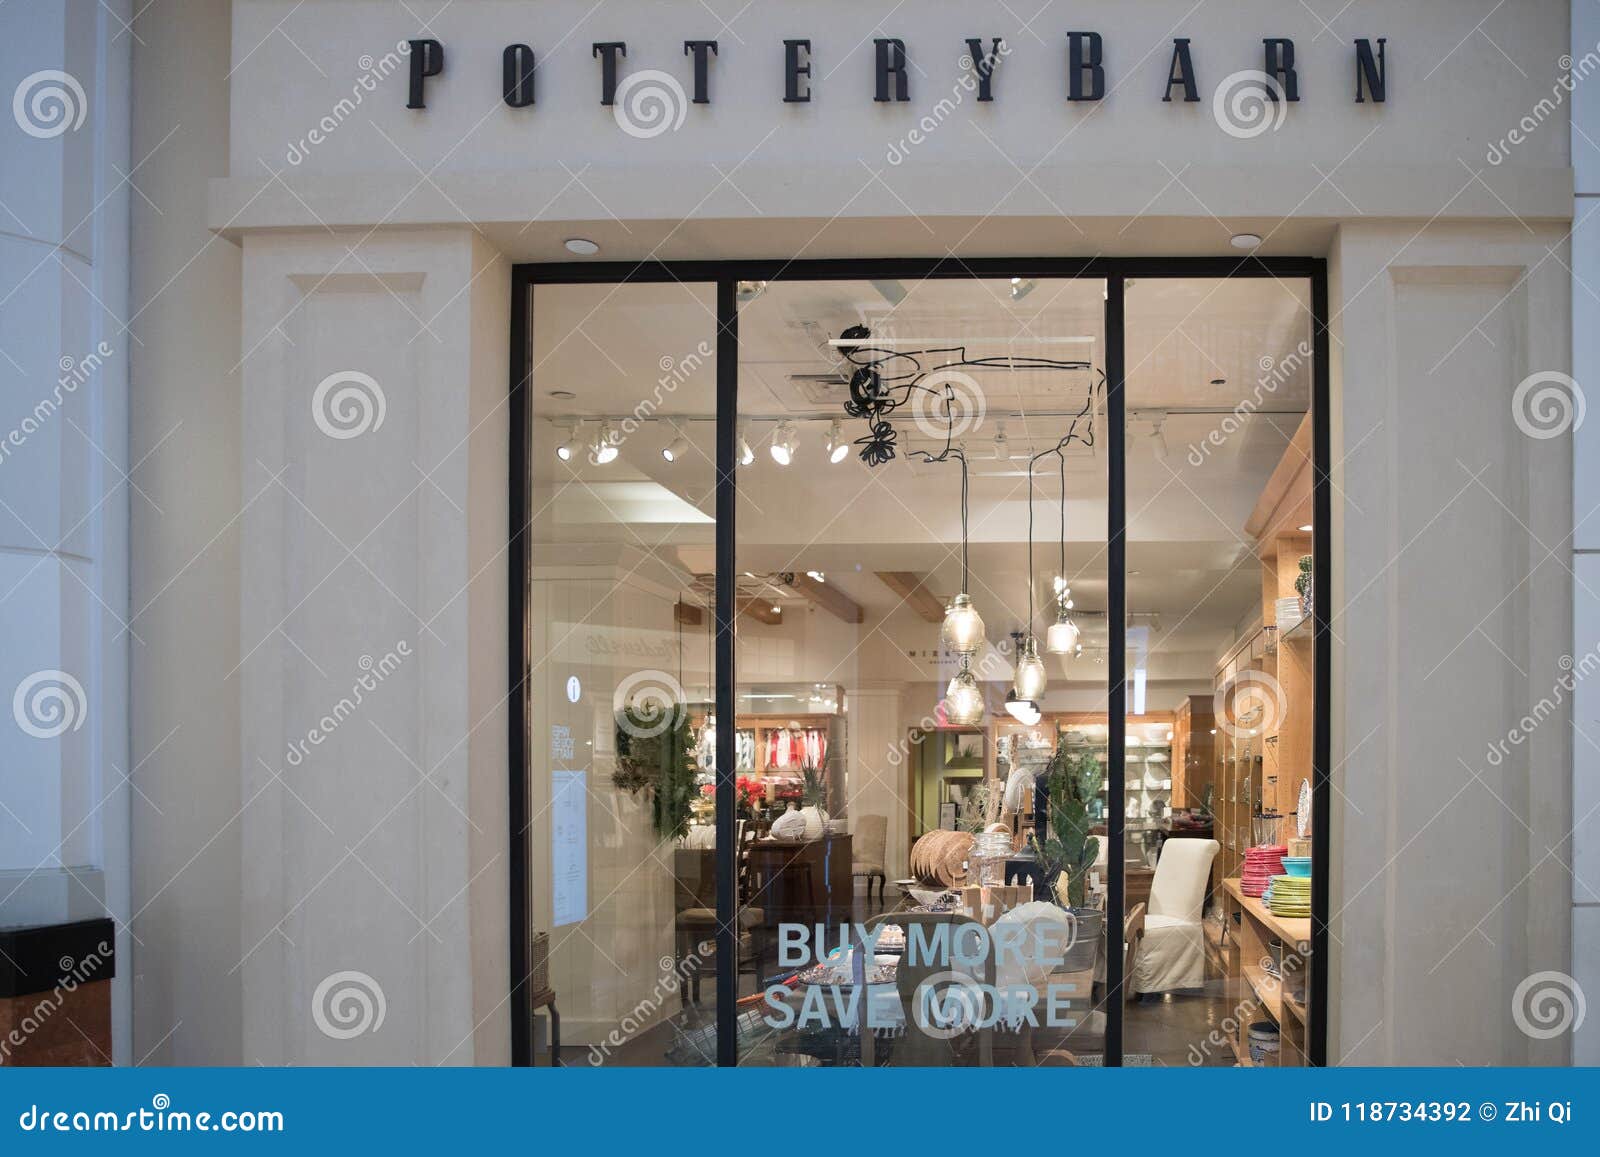 Pottery Barn Store Exterior. Editorial Photography - Image of country ...